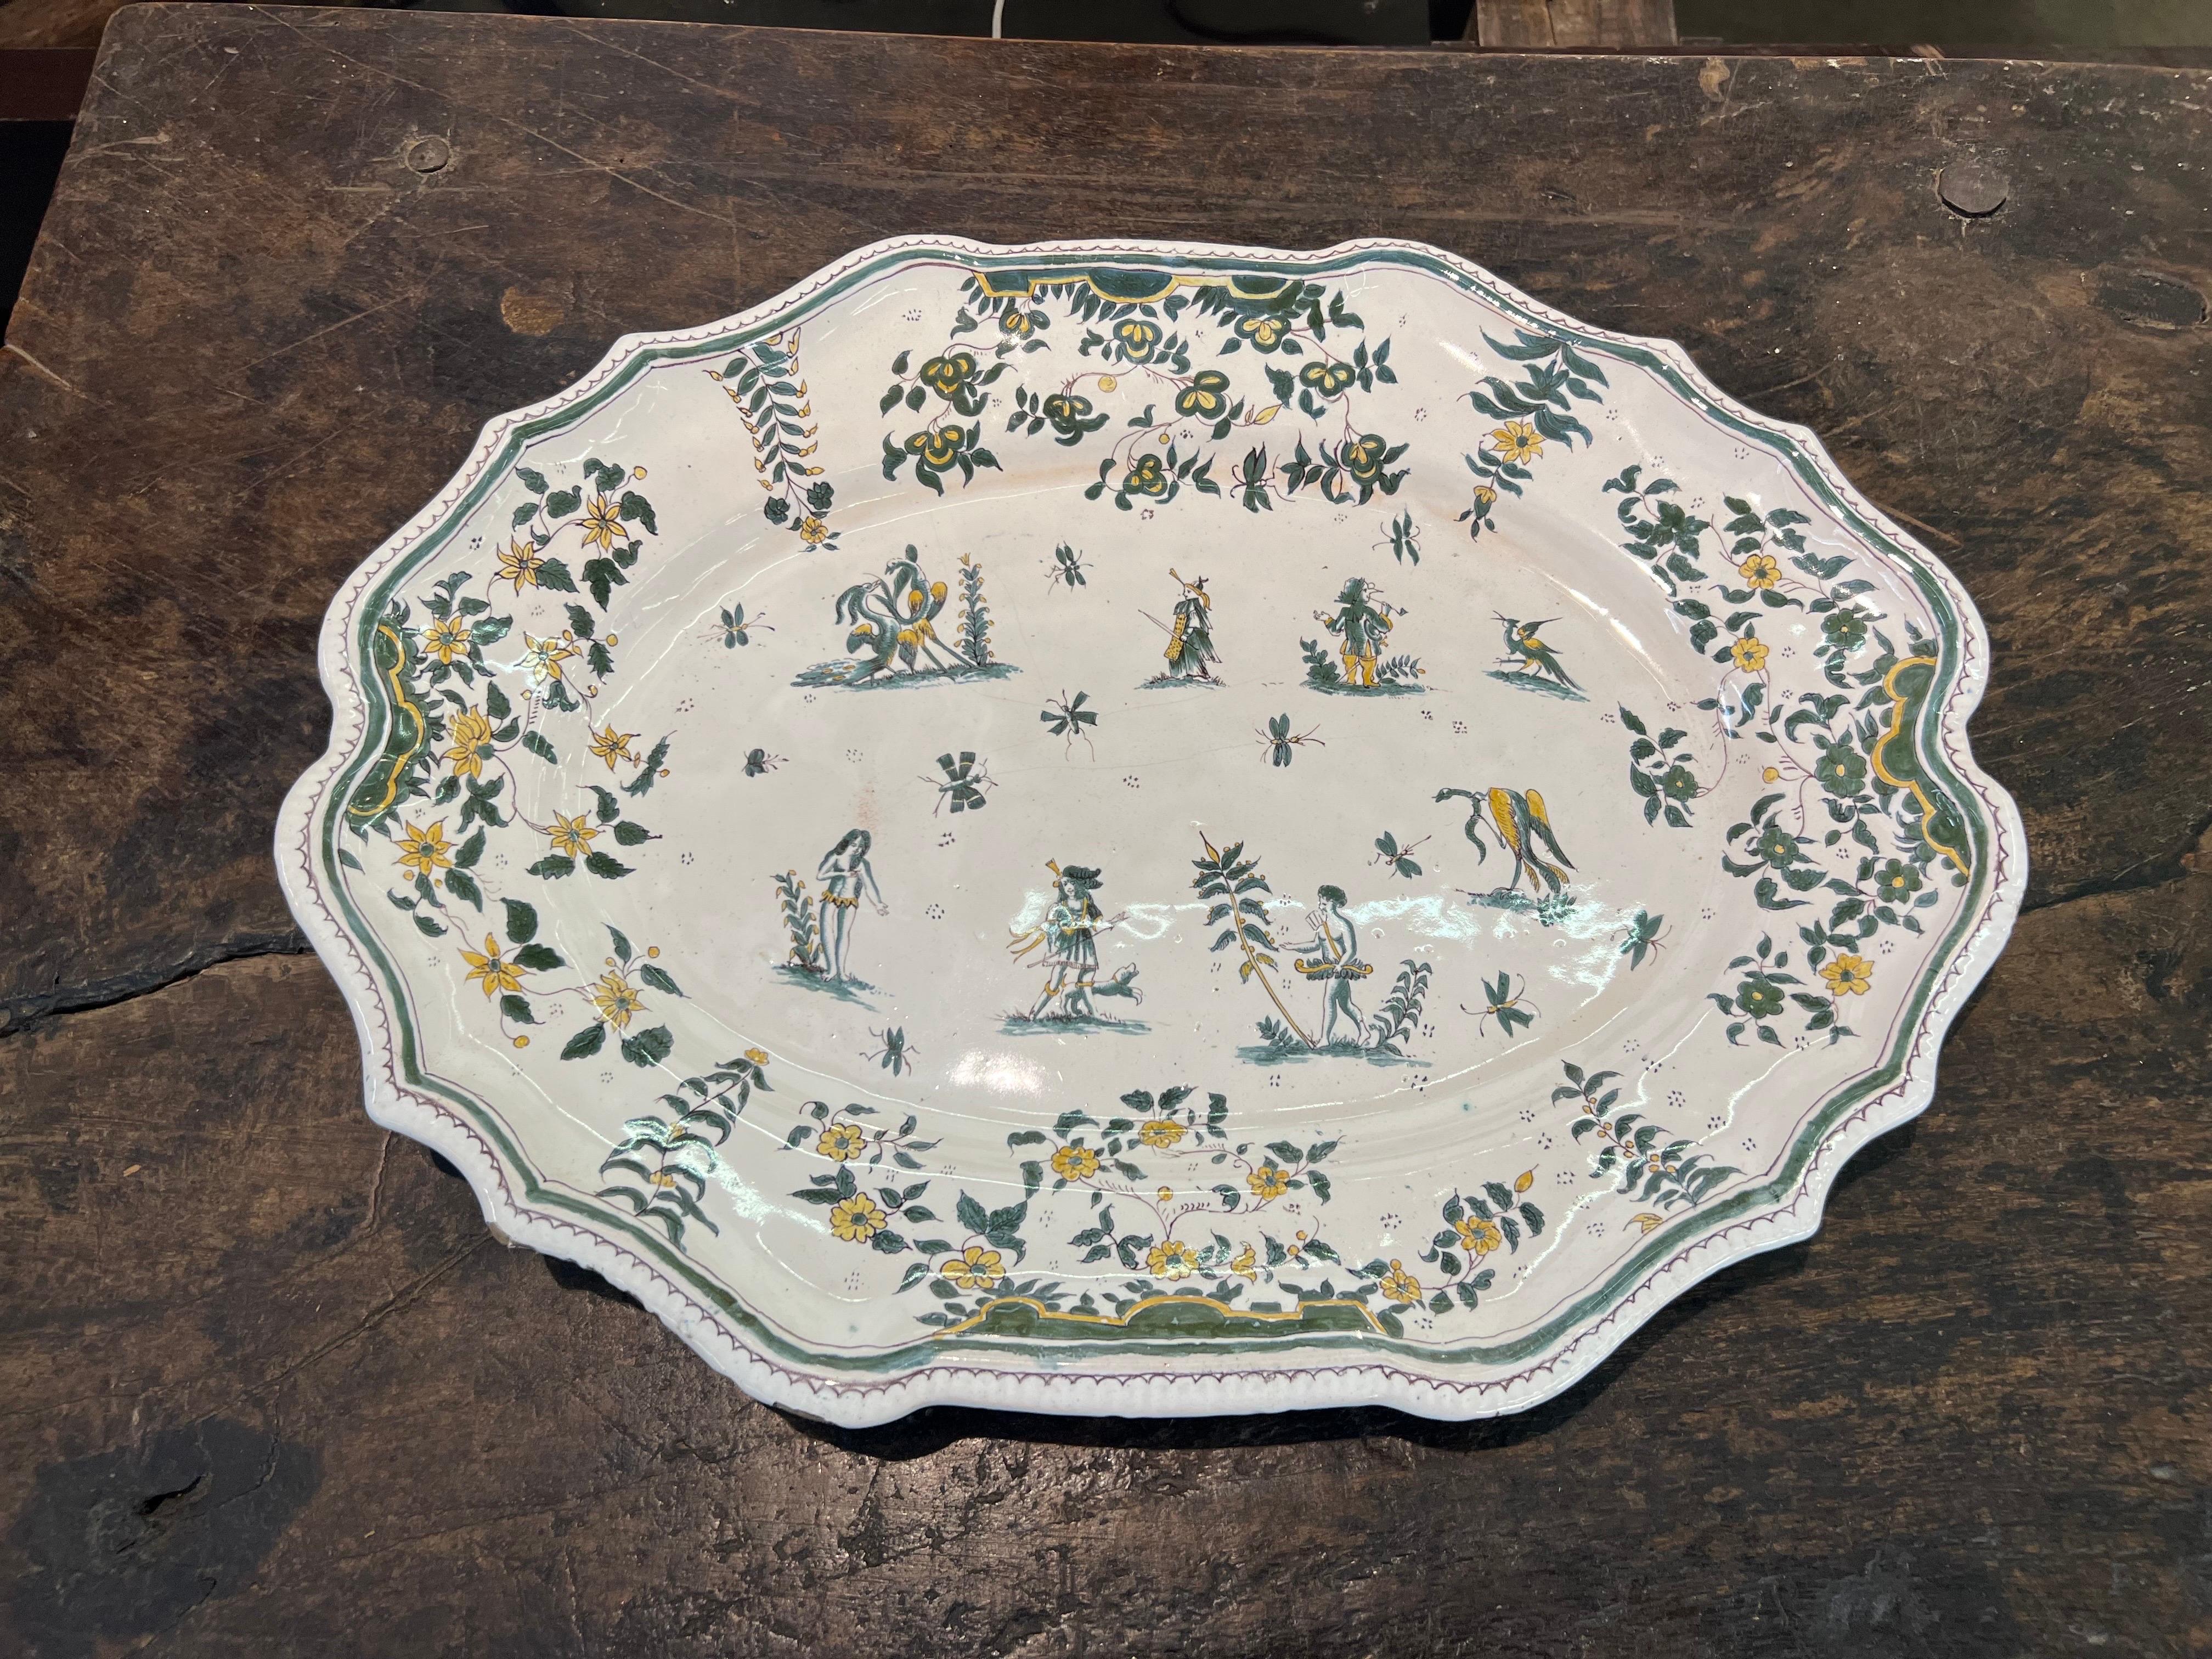 18th century polychrome French faience molded platter with scenes of gentry figures